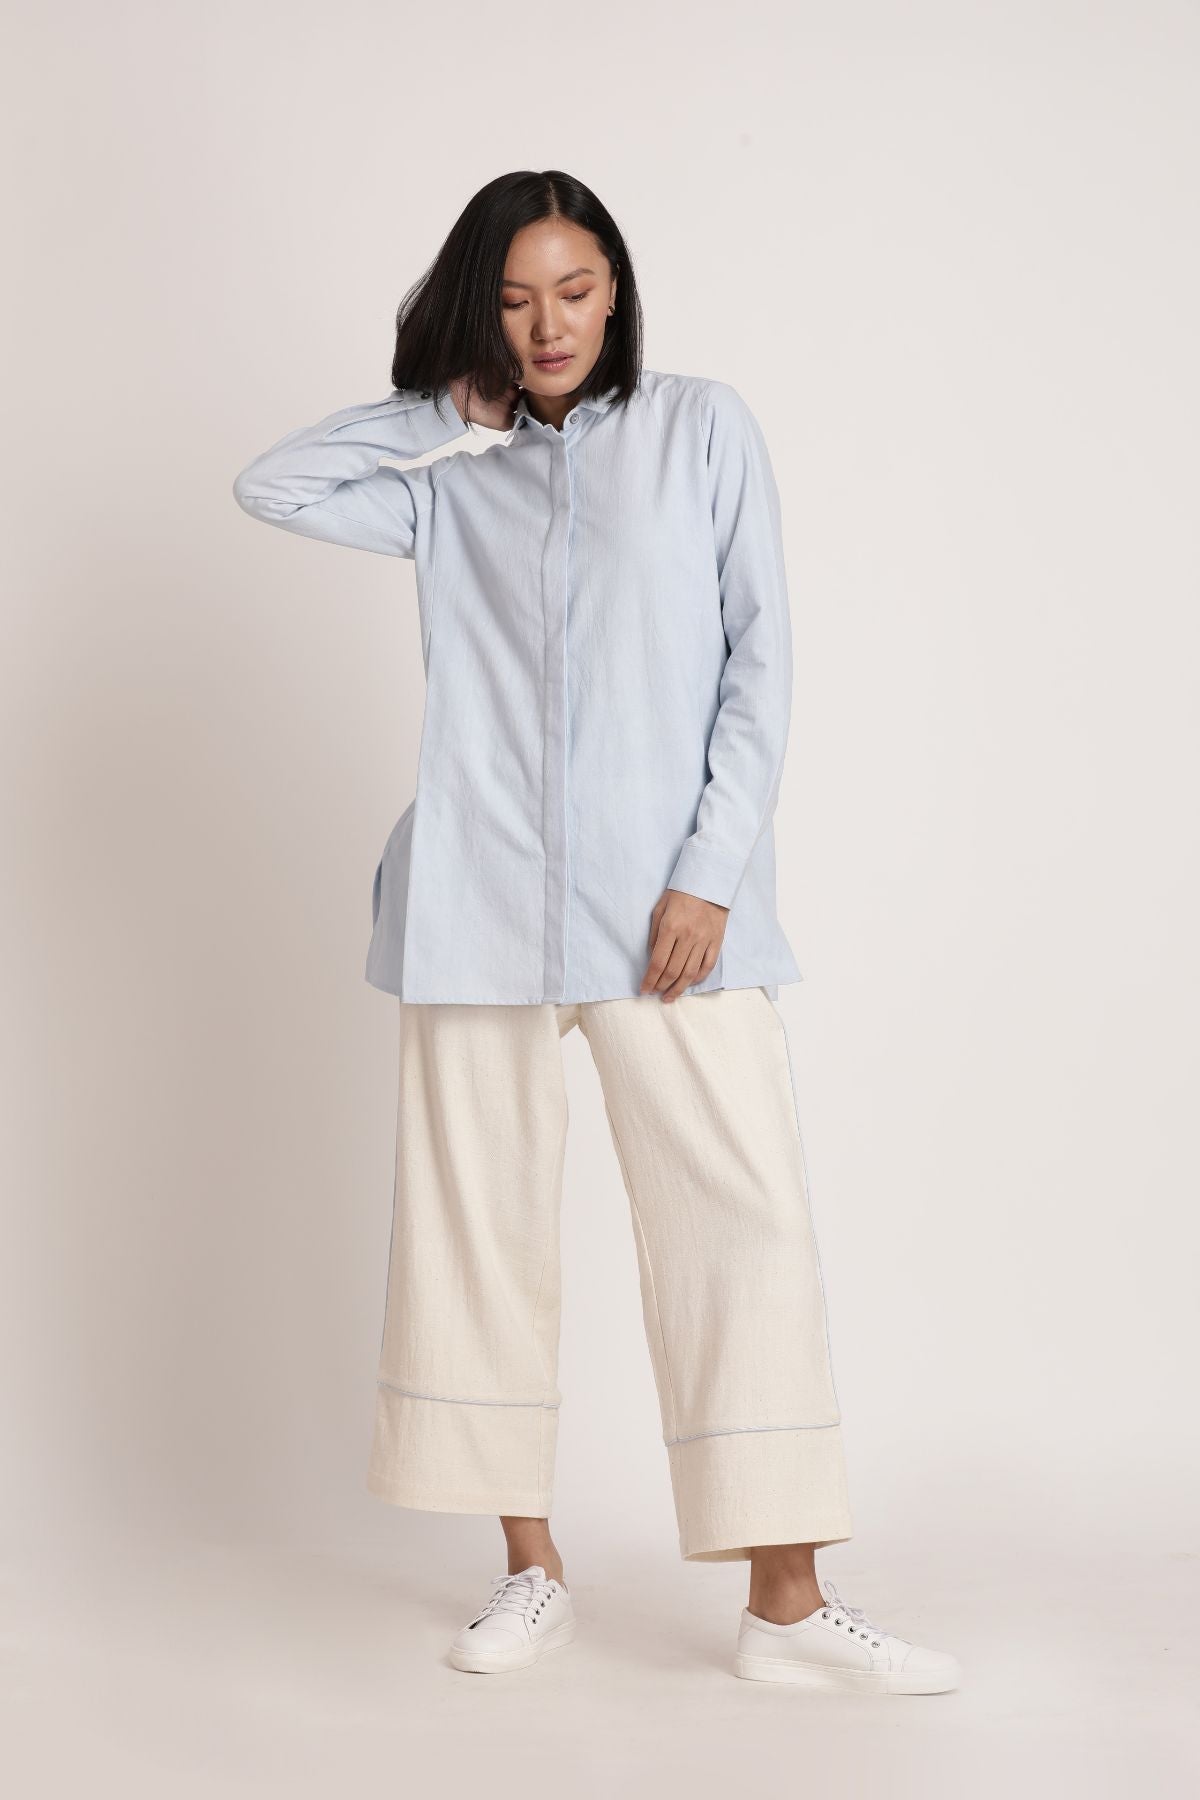 Blue Sora Beju Set by Itya with Blue, Co-ord Sets, Hand Spun Cotton, Handwoven cotton, Natural, Off-white, Office, Office Wear, Office Wear Co-ords, Pastel Perfect, Pastel Perfect by Itya, Plant Dye, Relaxed Fit, Solids, SS22, Womenswear at Kamakhyaa for sustainable fashion